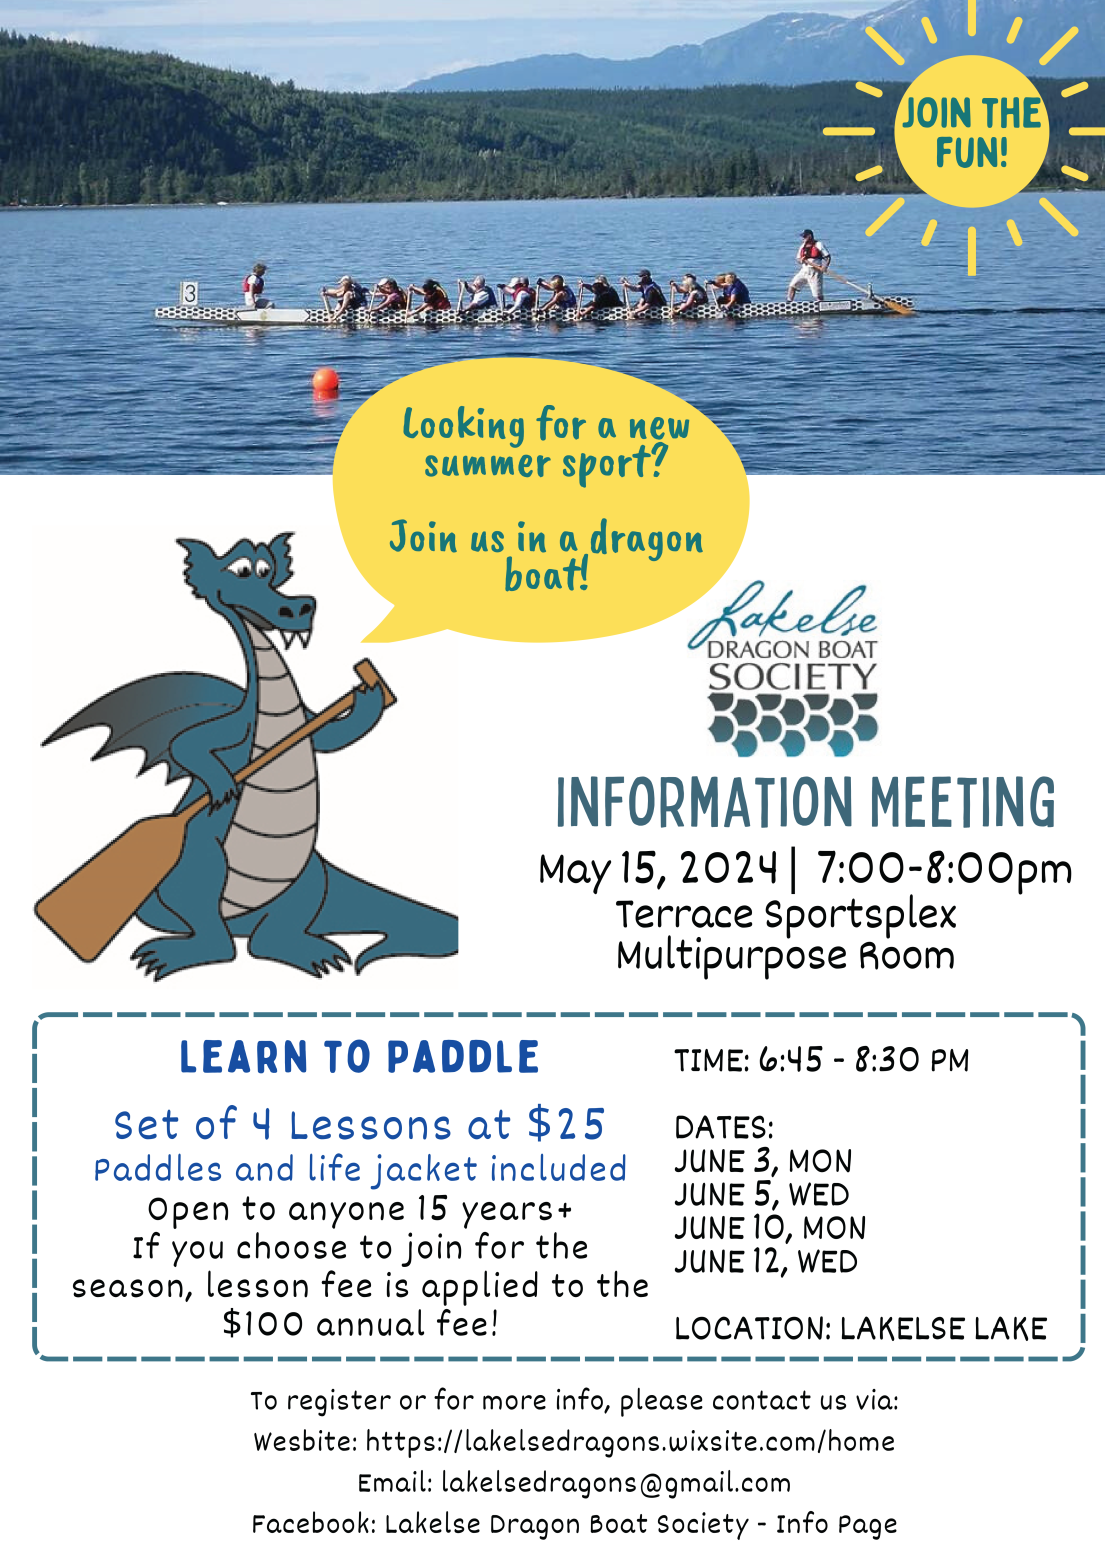 poster showing a photo of a dragon boat on Lakelse Lake, as well as a whimsical dragon graphic alongside the poster text